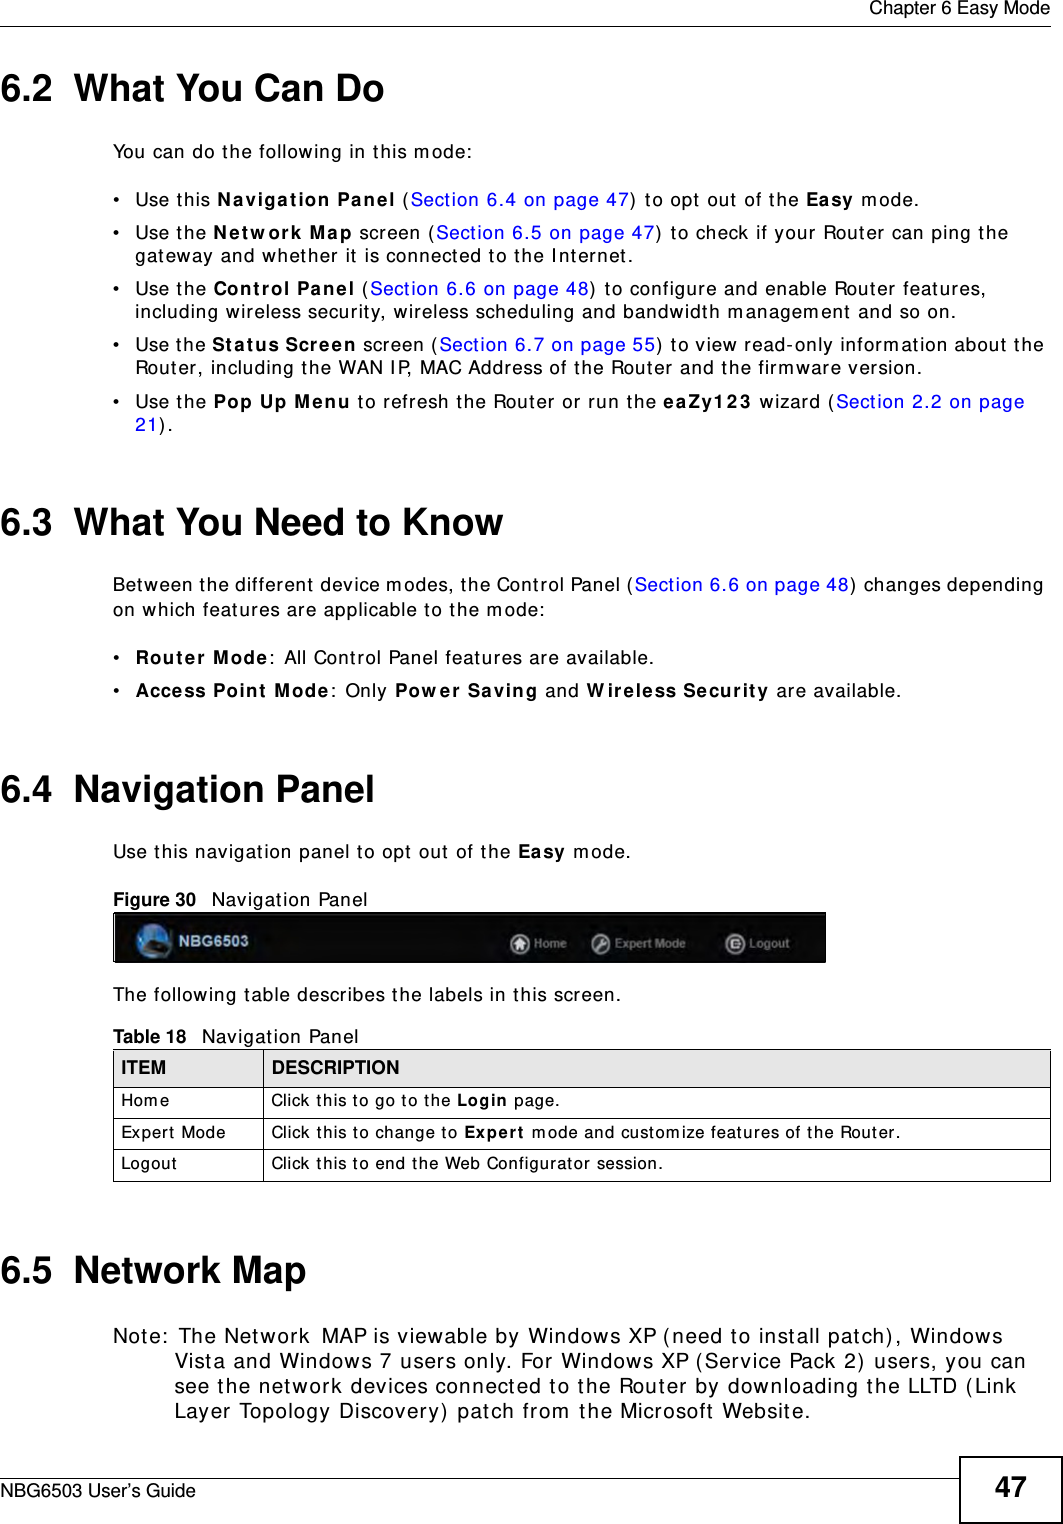  Chapter 6 Easy ModeNBG6503 User’s Guide 476.2  What You Can DoYou can do the following in this mode:•Use this Navigation Panel (Section 6.4 on page 47) to opt out of the Easy mode.•Use the Network Map screen (Section 6.5 on page 47) to check if your Router can ping the gateway and whether it is connected to the Internet.•Use the Control Panel (Section 6.6 on page 48) to configure and enable Router features, including wireless security, wireless scheduling and bandwidth management and so on.•Use the Status Screen screen (Section 6.7 on page 55) to view read-only information about the Router, including the WAN IP, MAC Address of the Router and the firmware version.•Use the Pop Up Menu to refresh the Router or run the eaZy123 wizard (Section 2.2 on page 21).6.3  What You Need to KnowBetween the different device modes, the Control Panel (Section 6.6 on page 48) changes depending on which features are applicable to the mode:•Router Mode: All Control Panel features are available.•Access Point Mode: Only Power Saving and Wireless Security are available.6.4  Navigation PanelUse this navigation panel to opt out of the Easy mode.Figure 30   Navigation PanelThe following table describes the labels in this screen.6.5  Network MapNote: The Network MAP is viewable by Windows XP (need to install patch), Windows Vista and Windows 7 users only. For Windows XP (Service Pack 2) users, you can see the network devices connected to the Router by downloading the LLTD (Link Layer Topology Discovery) patch from the Microsoft Website.Table 18   Navigation PanelITEM DESCRIPTIONHome Click this to go to the Login page. Expert Mode Click this to change to Expert mode and customize features of the Router.Logout Click this to end the Web Configurator session.